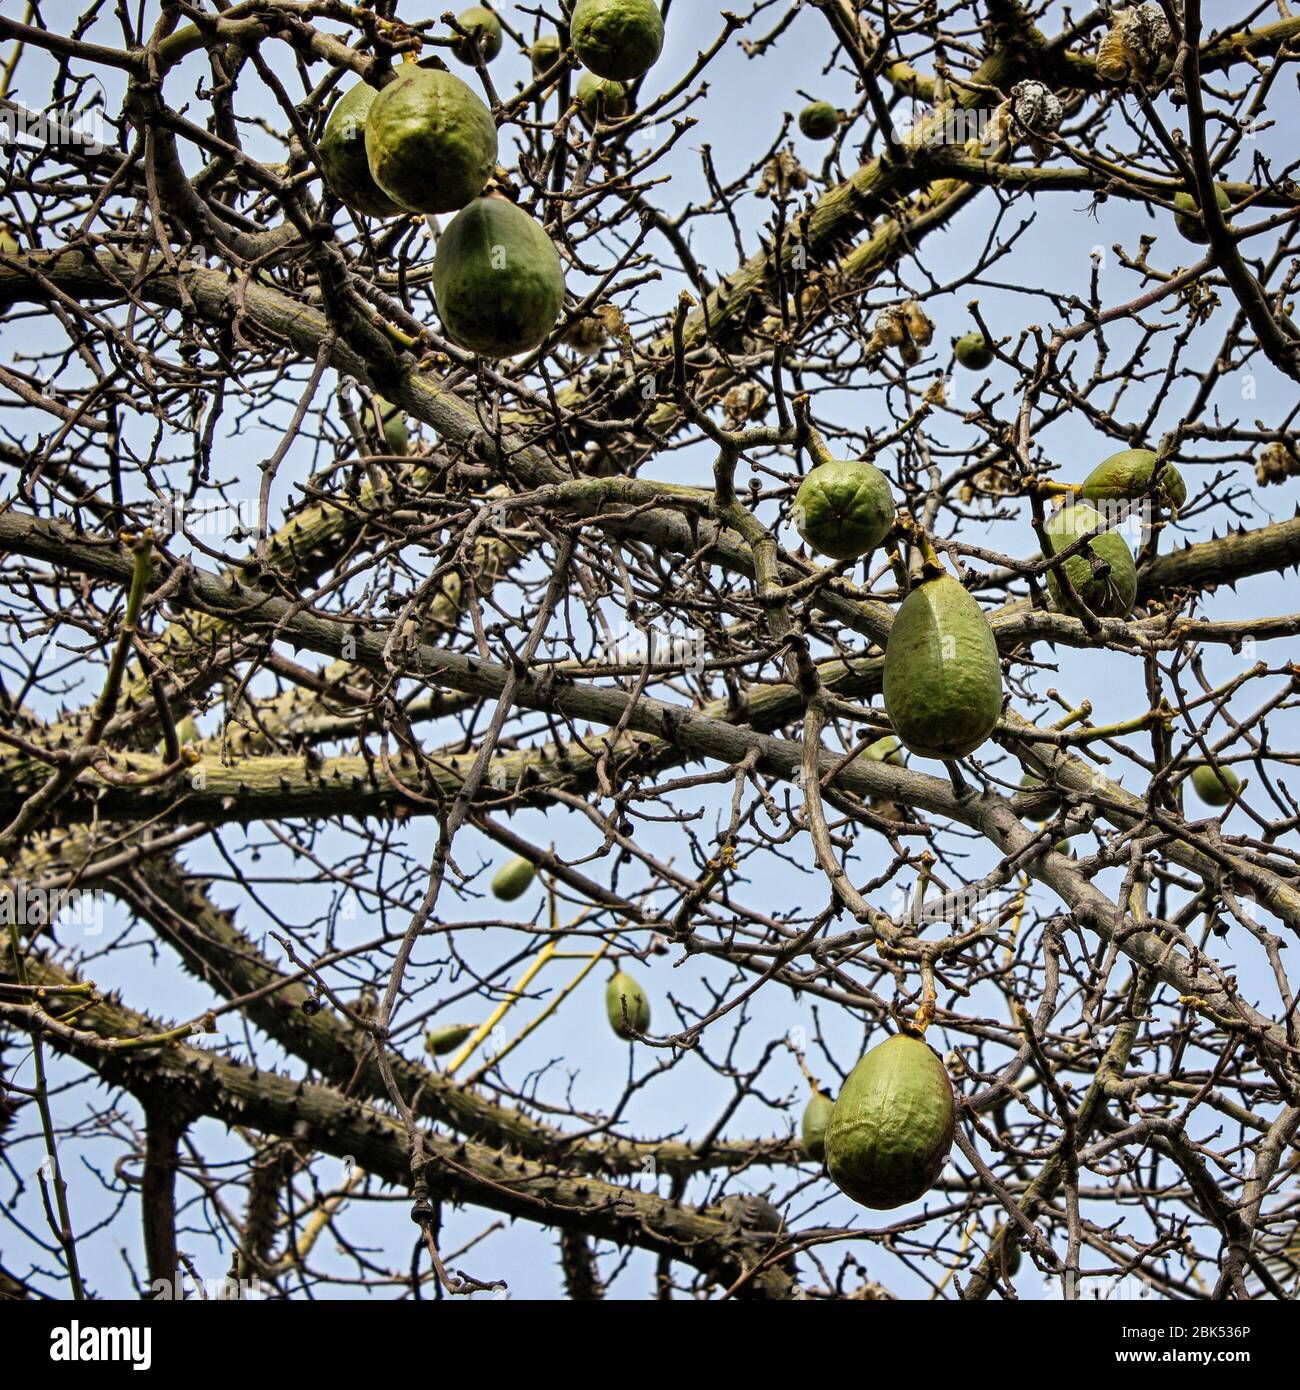 Ceiba insignis (White Floss Silk Tree) branches and fruits in Barcelona city park. Catalonia, Spain. Stock Photo